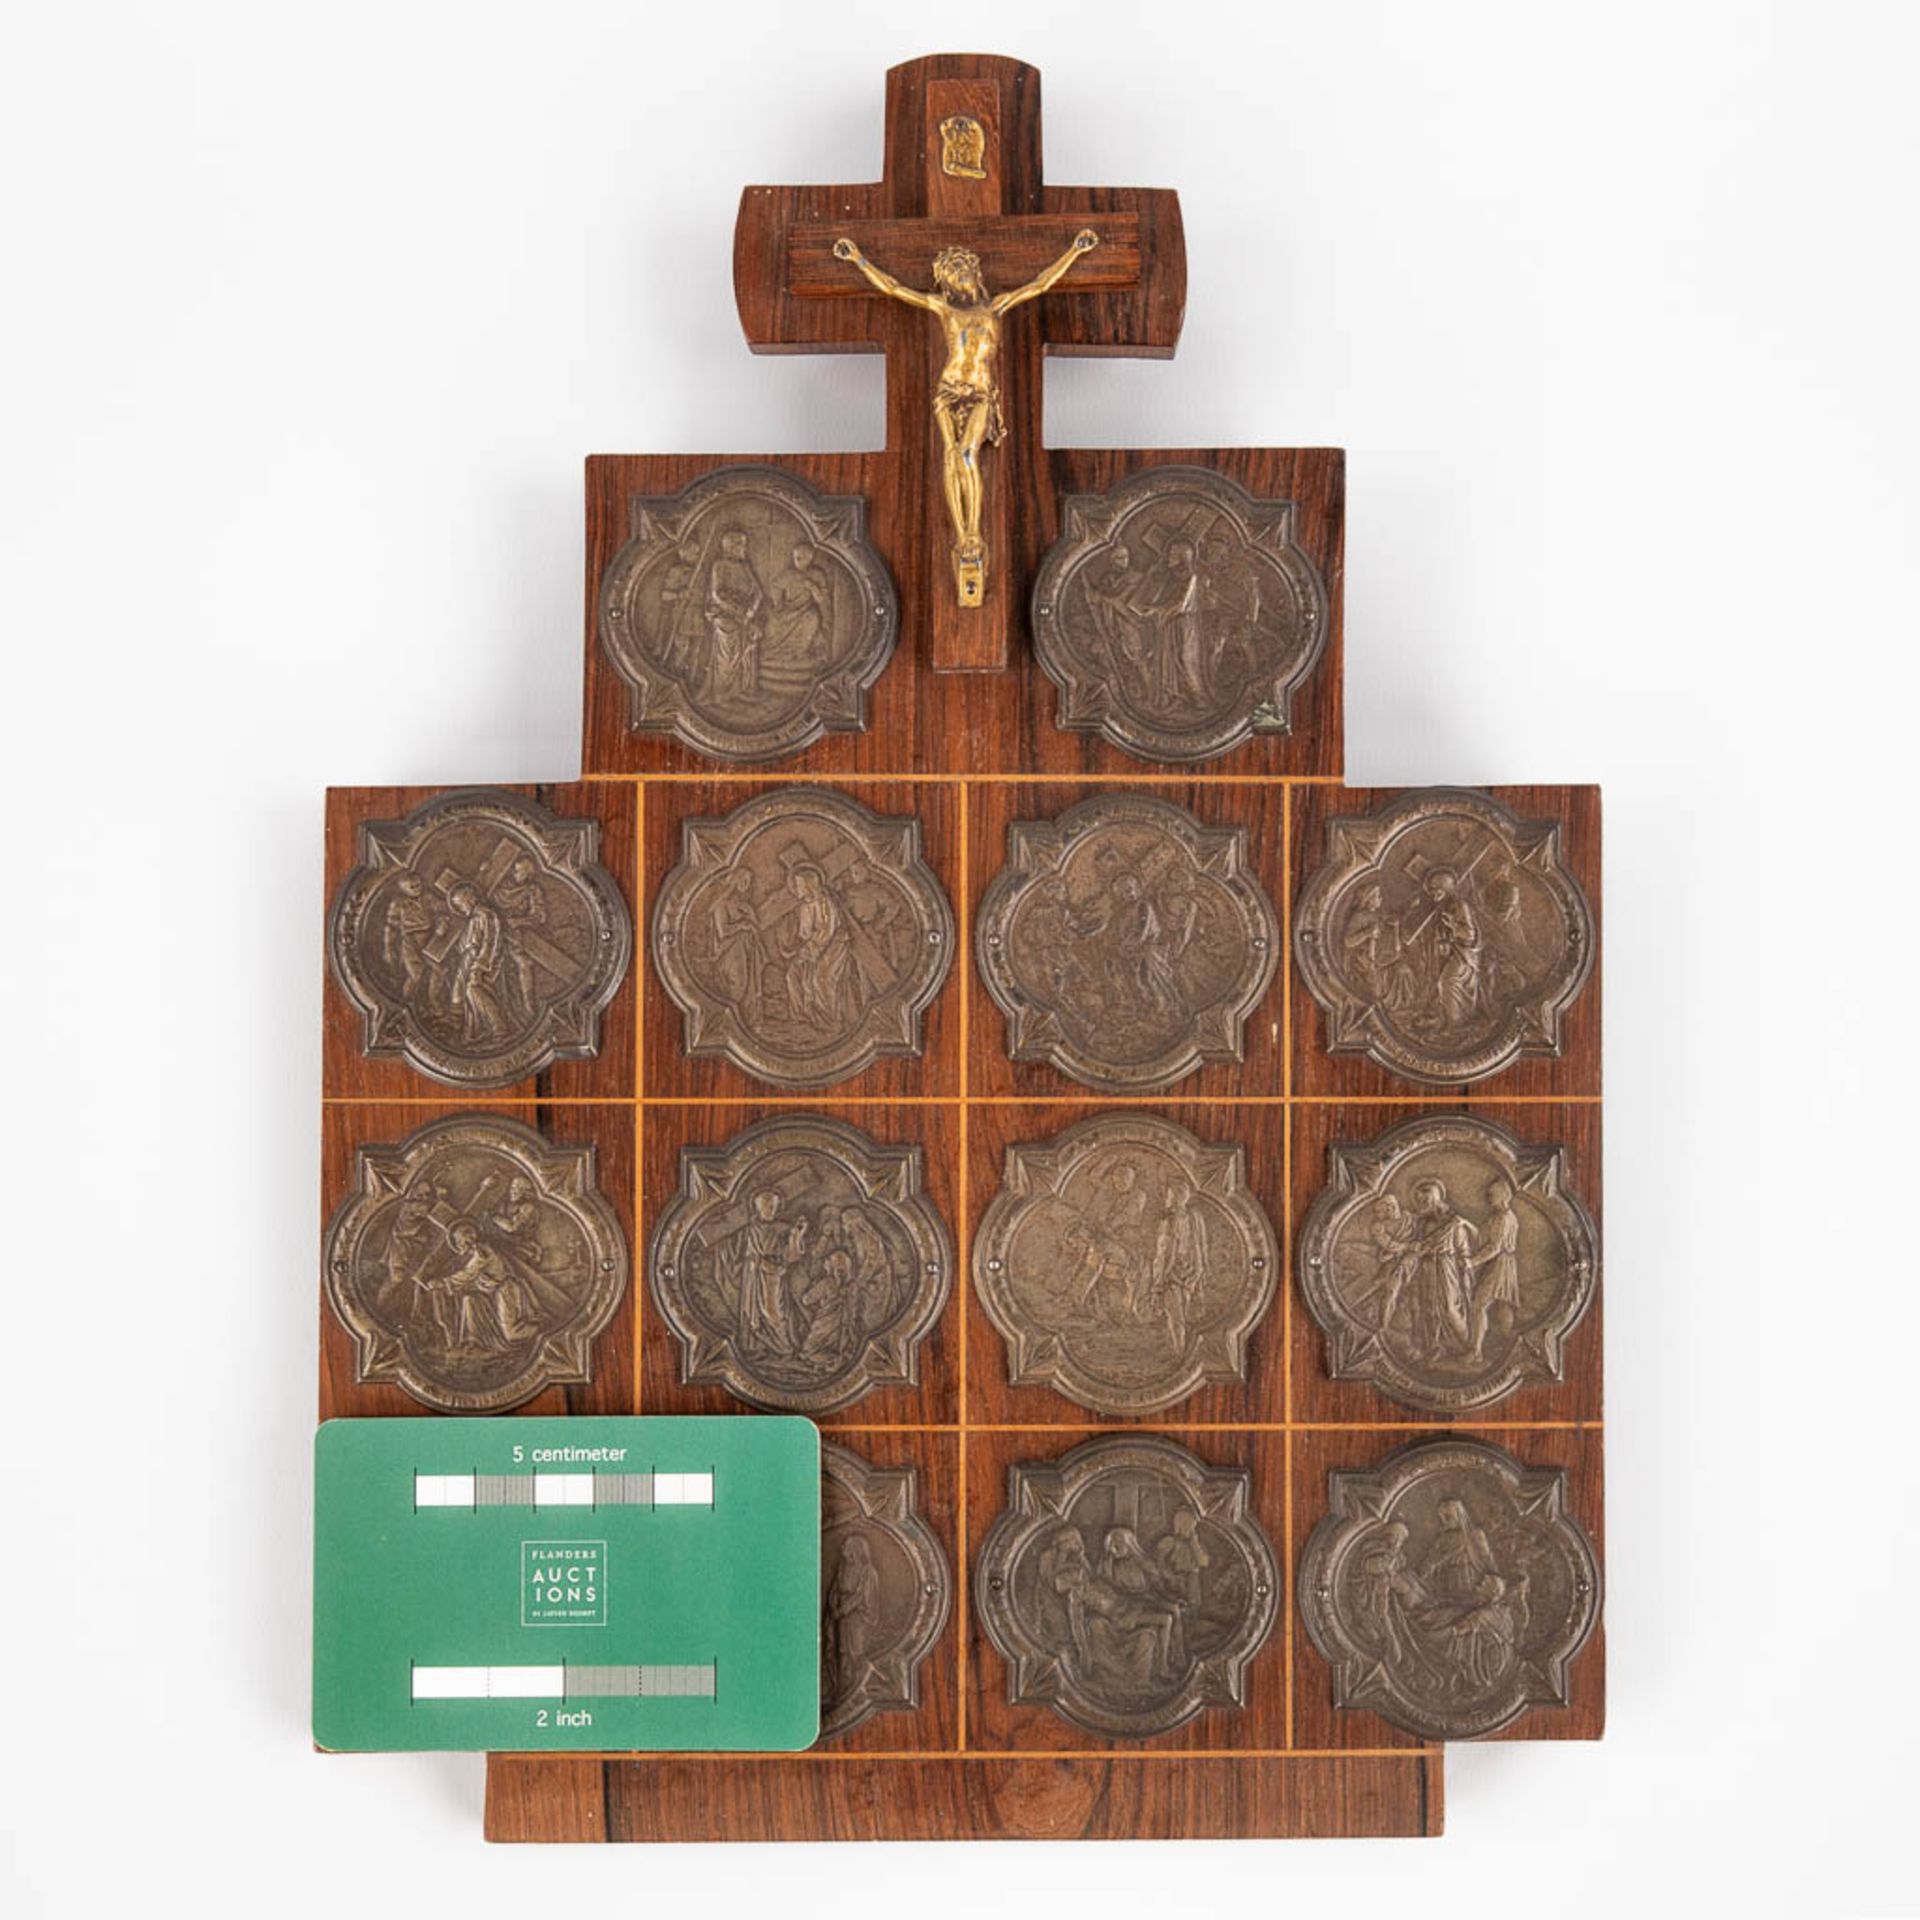 A wall plaque with 14 'Stations of the cross', medals and a crucifix. (W:22 x H:30 cm) - Bild 2 aus 8